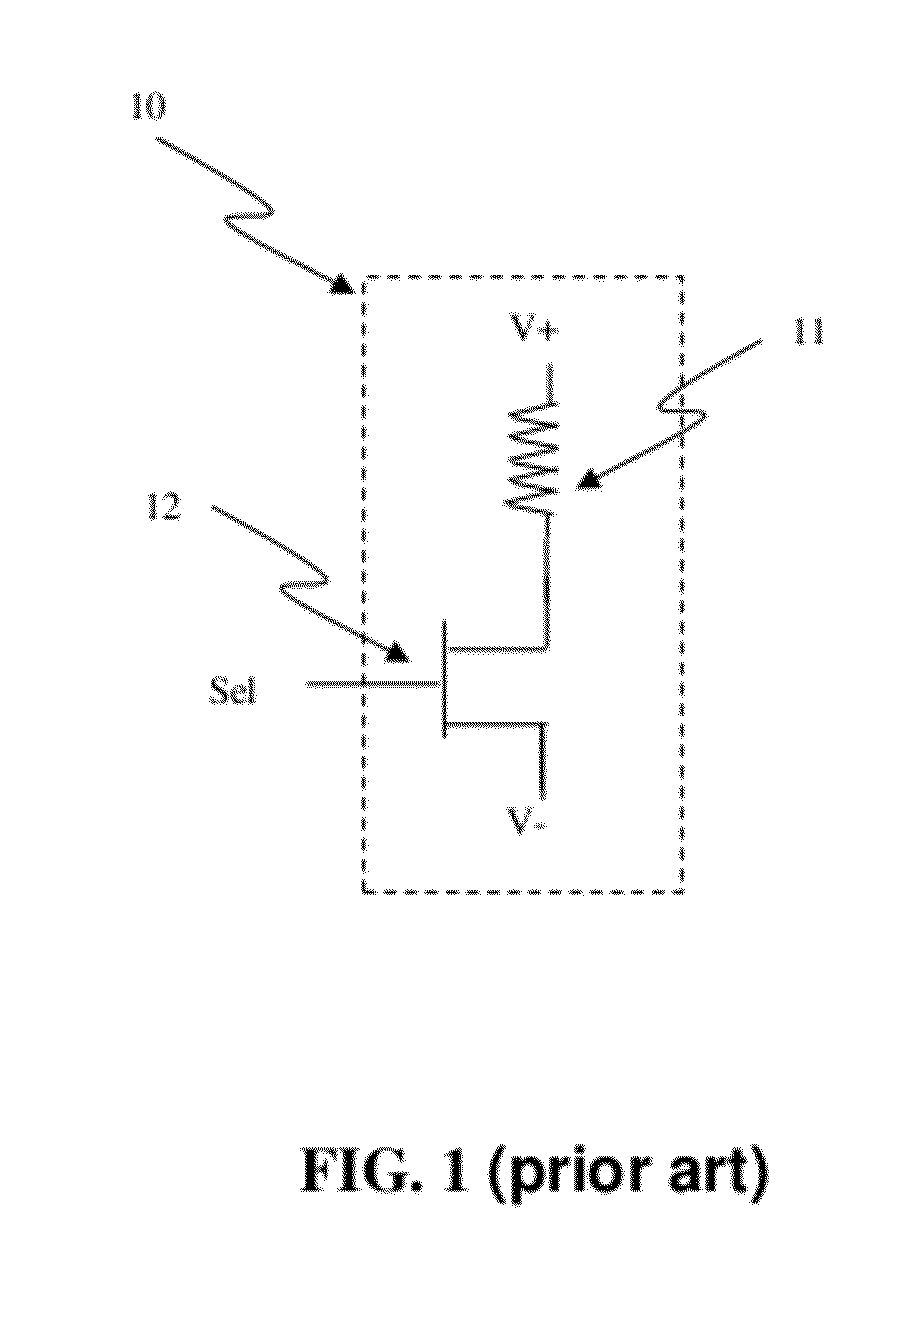 Circuit and system of using junction diode as program selector for one-time programmable devices